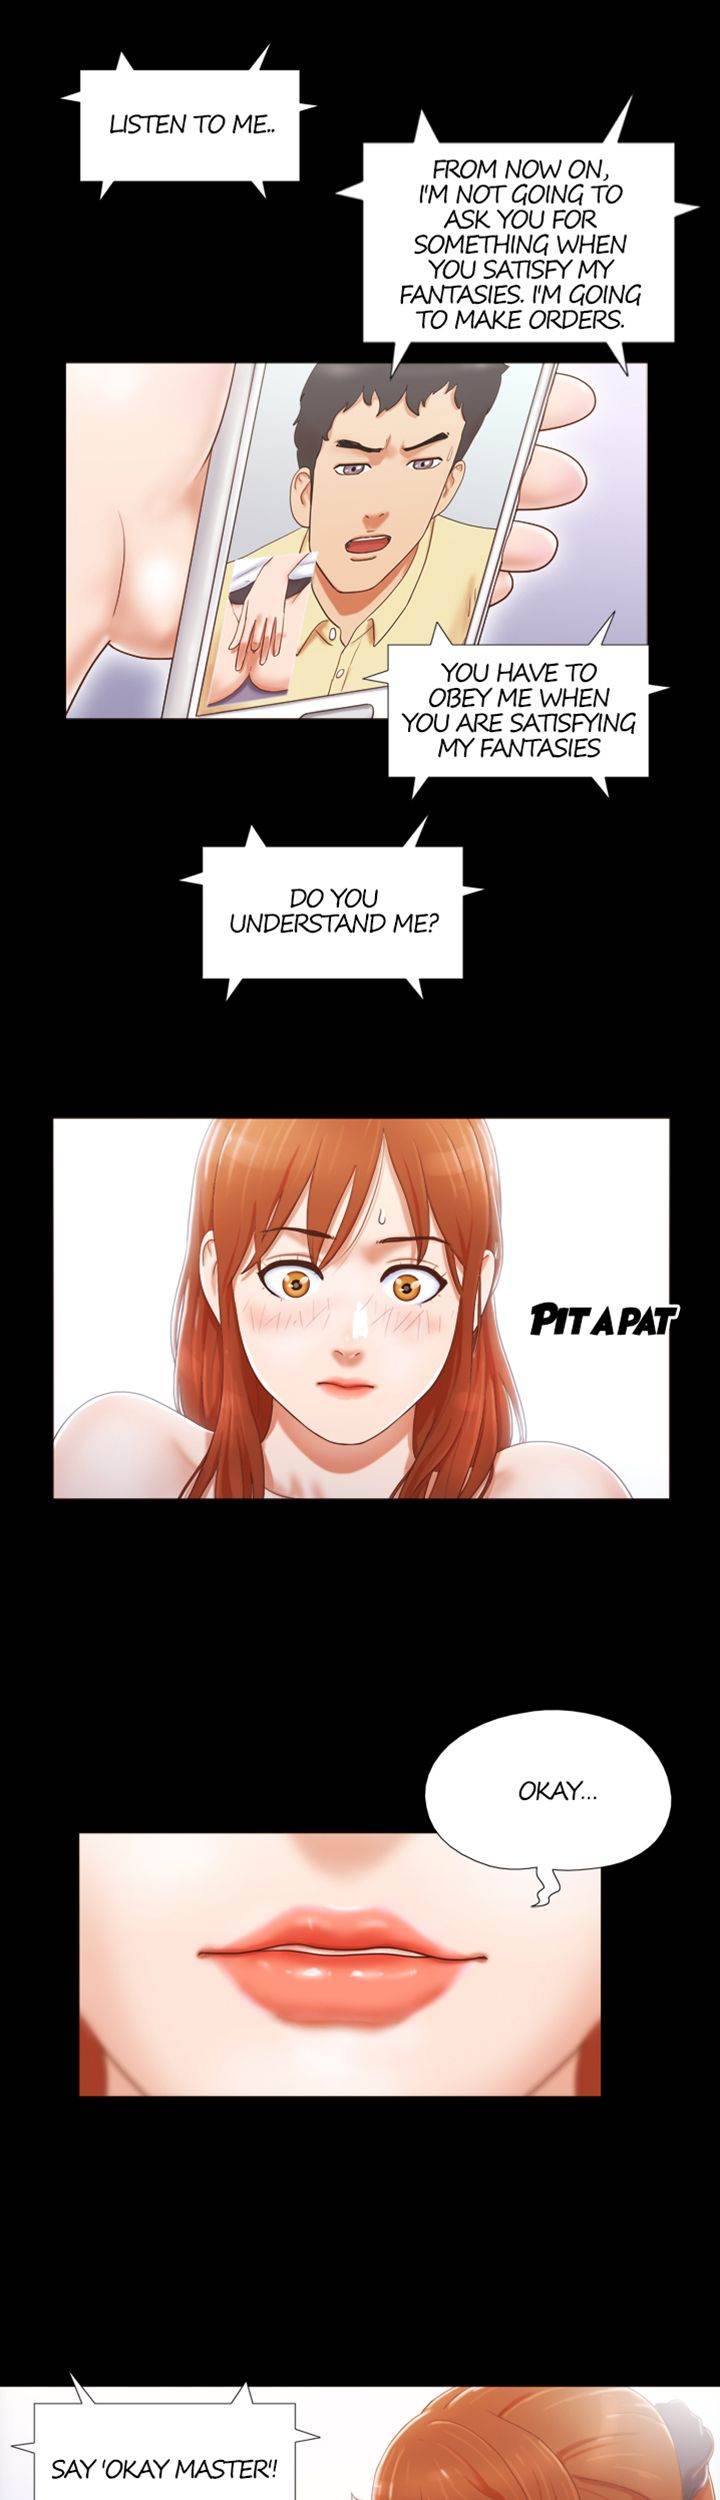 Couple Game: 17 Sex Fantasies Ver.2 - Chapter 11 Page 3